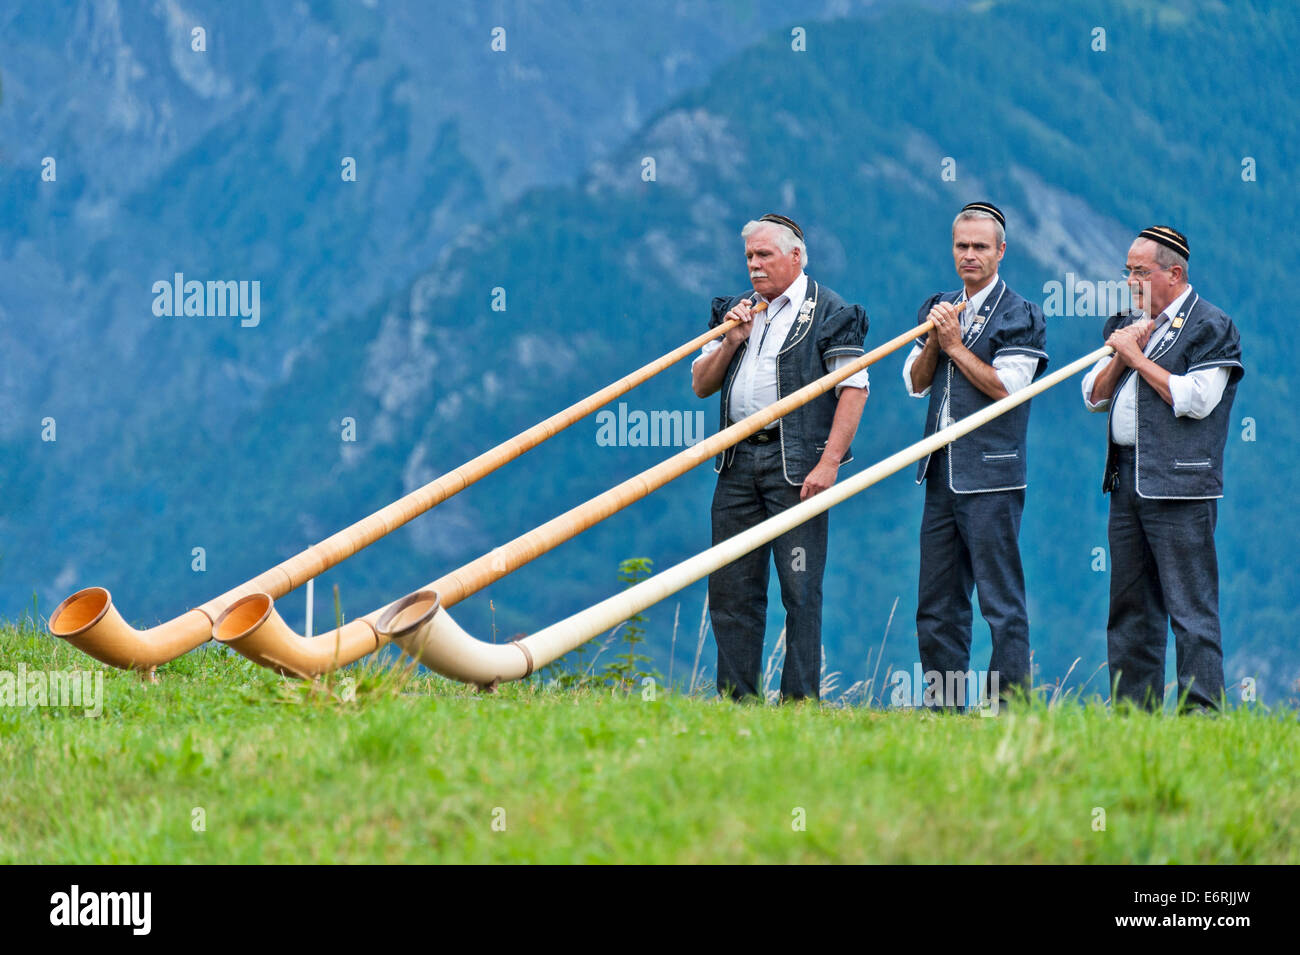 Three Swiss alphorn players, wearing traditional dress, preparing to play their instruments Stock Photo